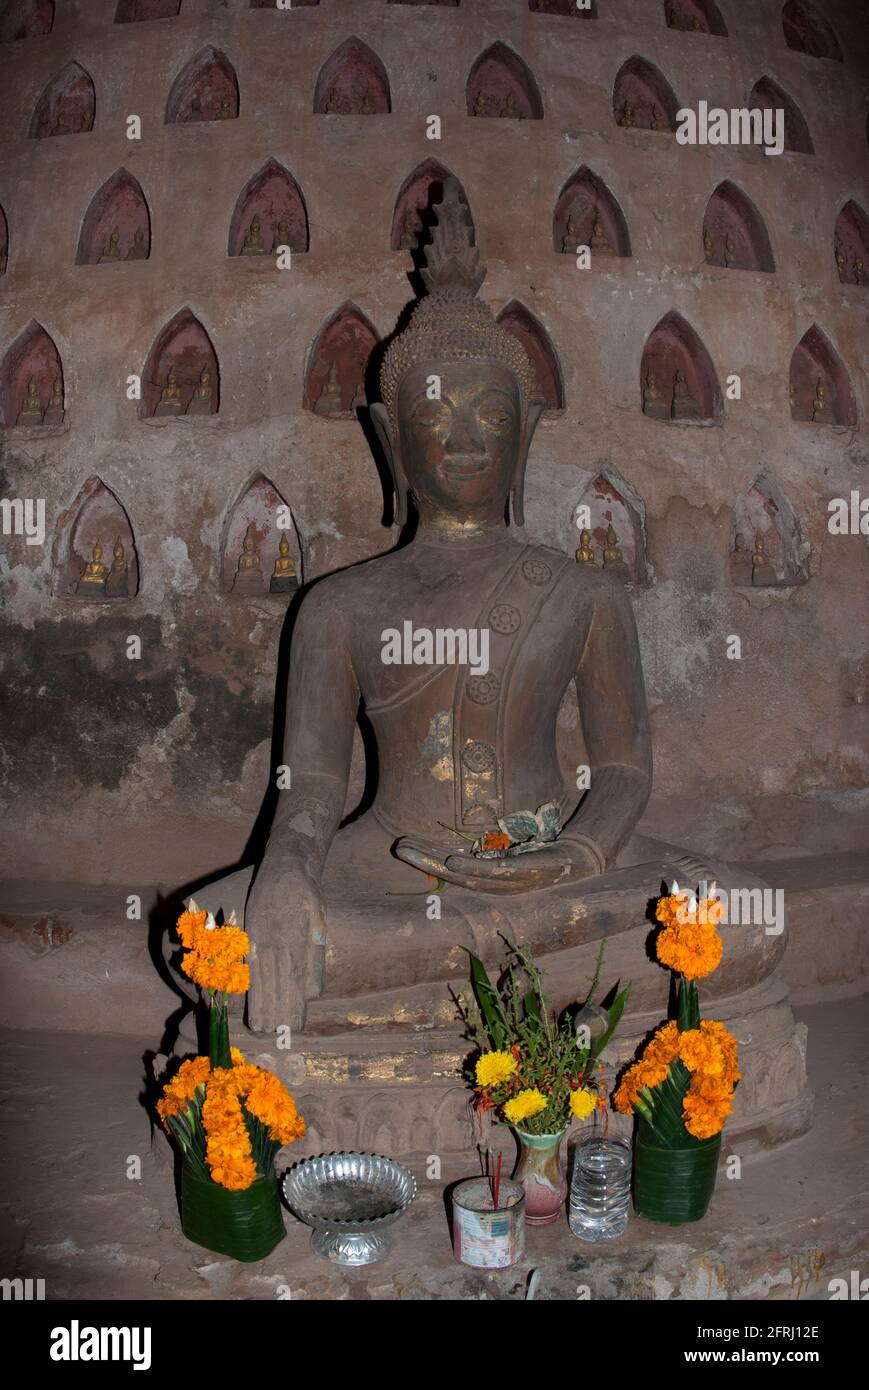 Statue of seated Buddha with flowers, Cloisters with small Buddhas in niches in wall, Wat Si Saket, Vientiane, Lao Stock Photo